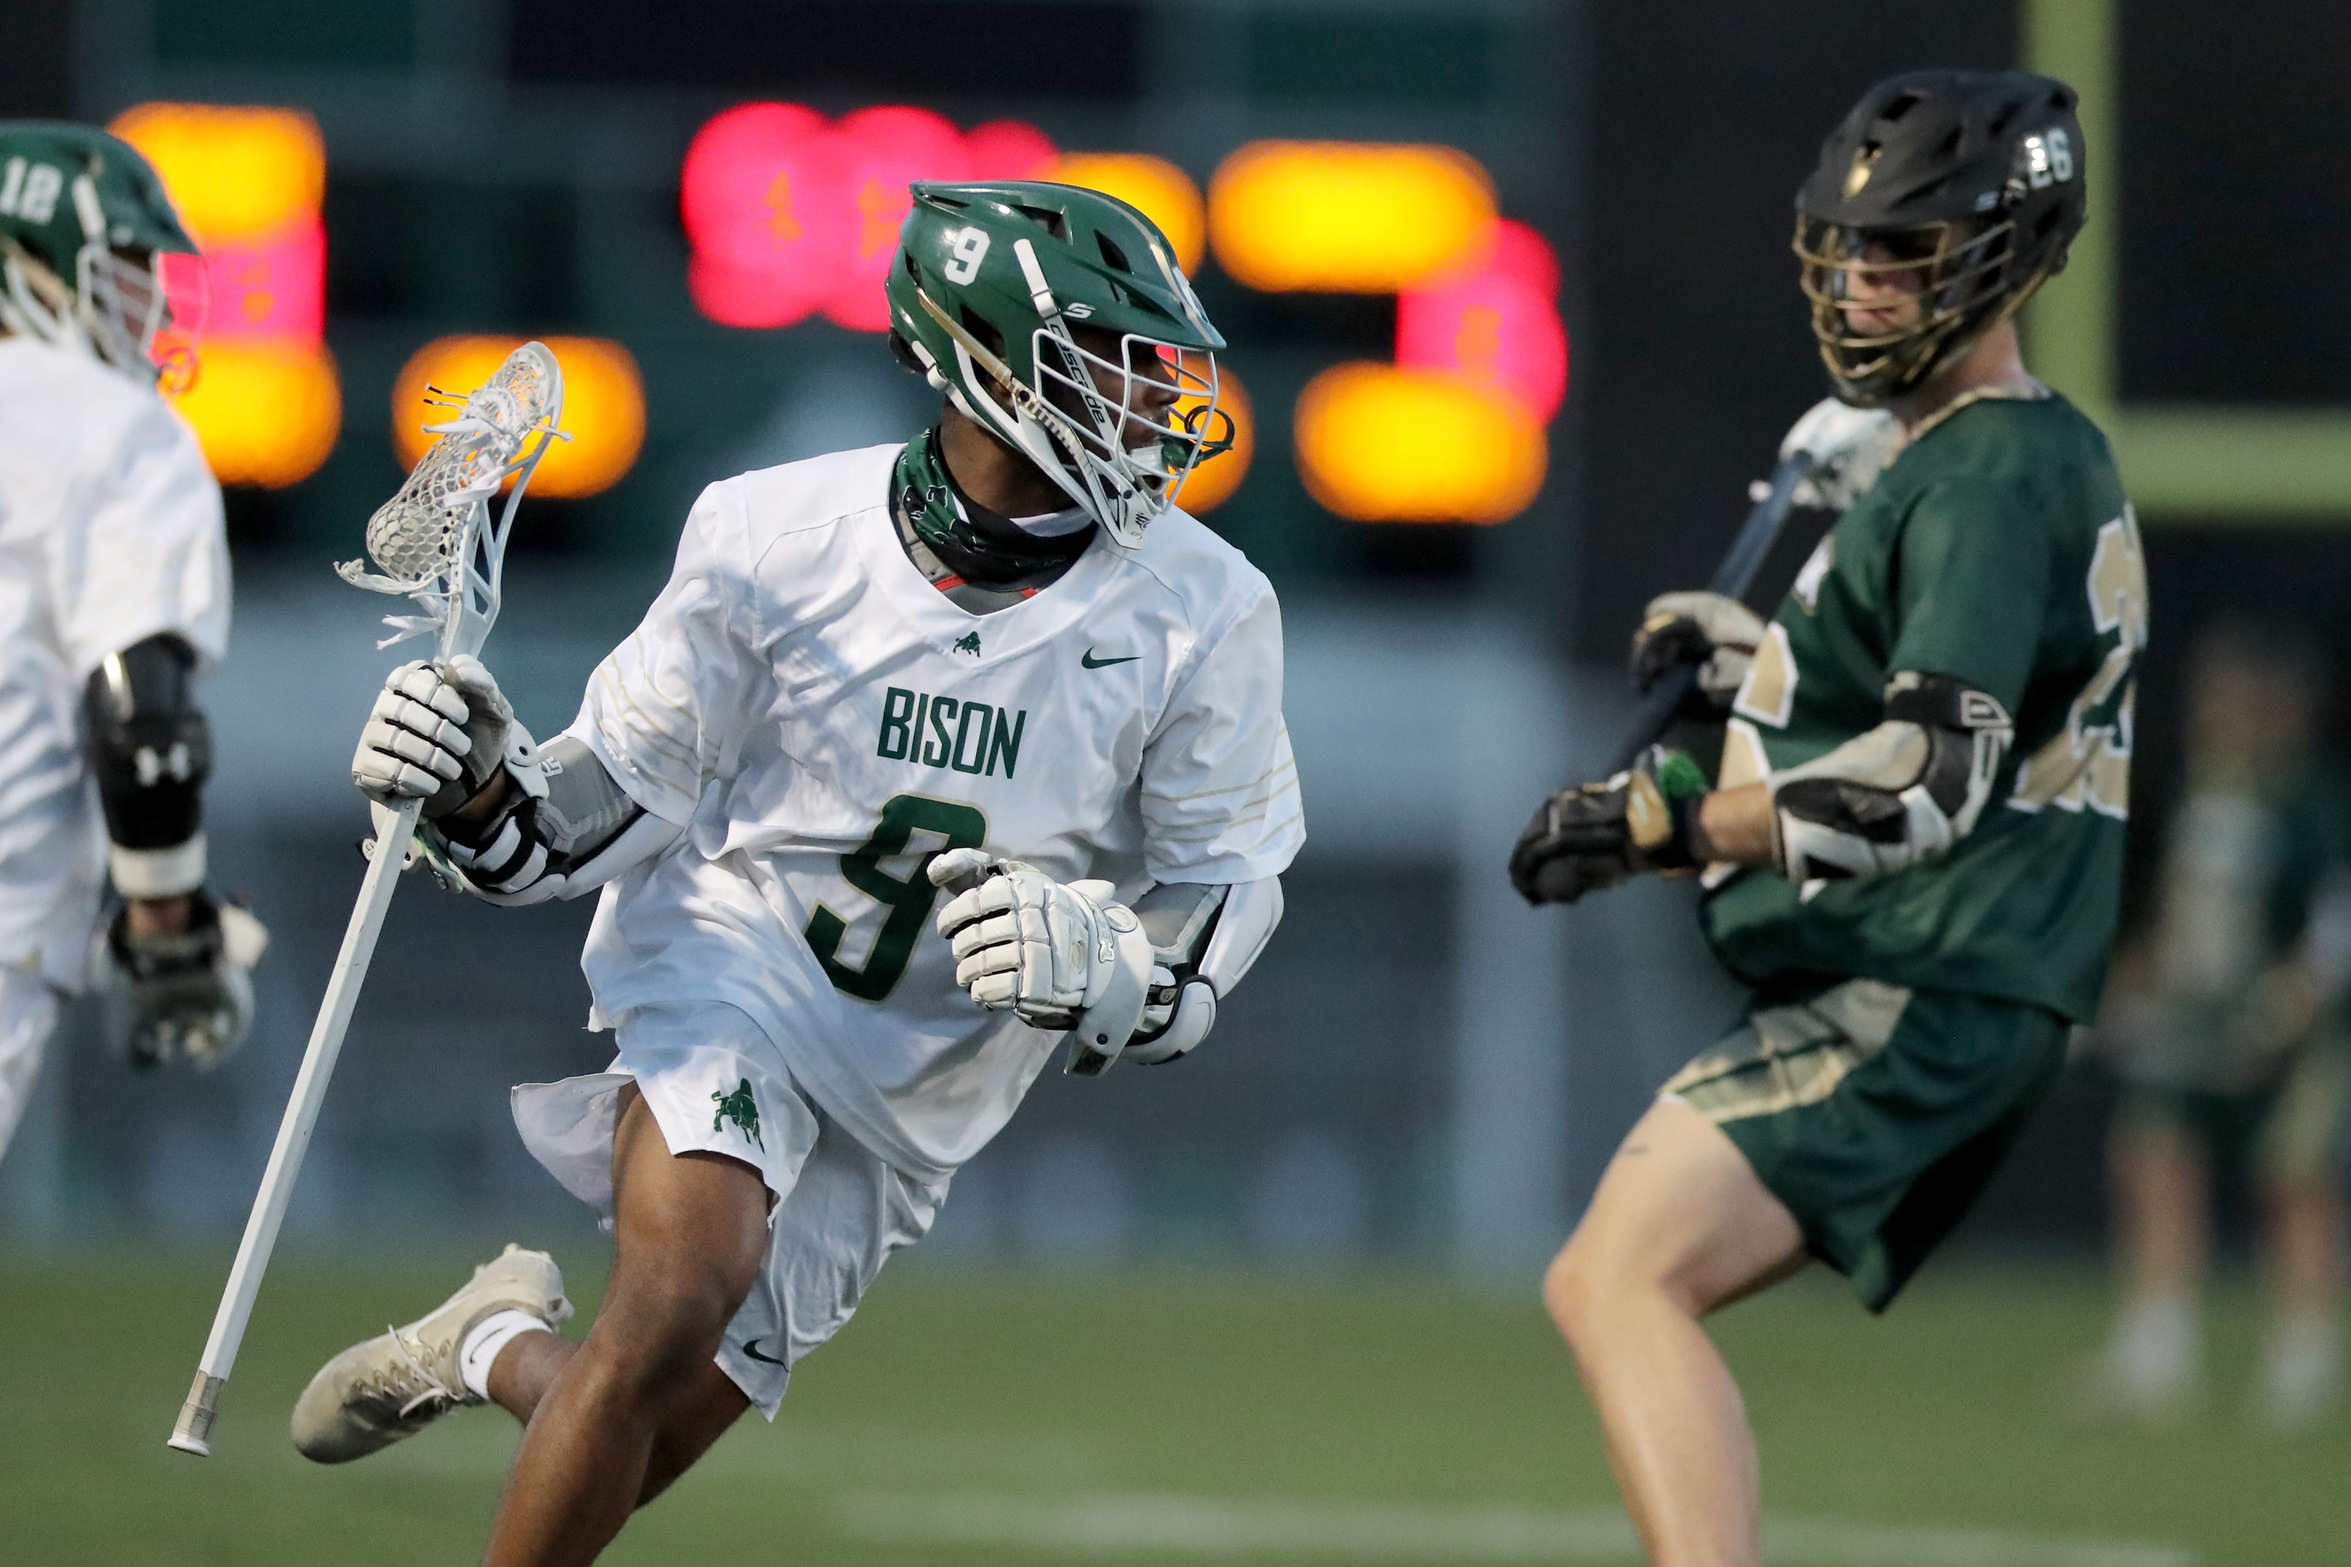 Men's Lacrosse: Bison Hang on to 15-10 Victory Over Barons